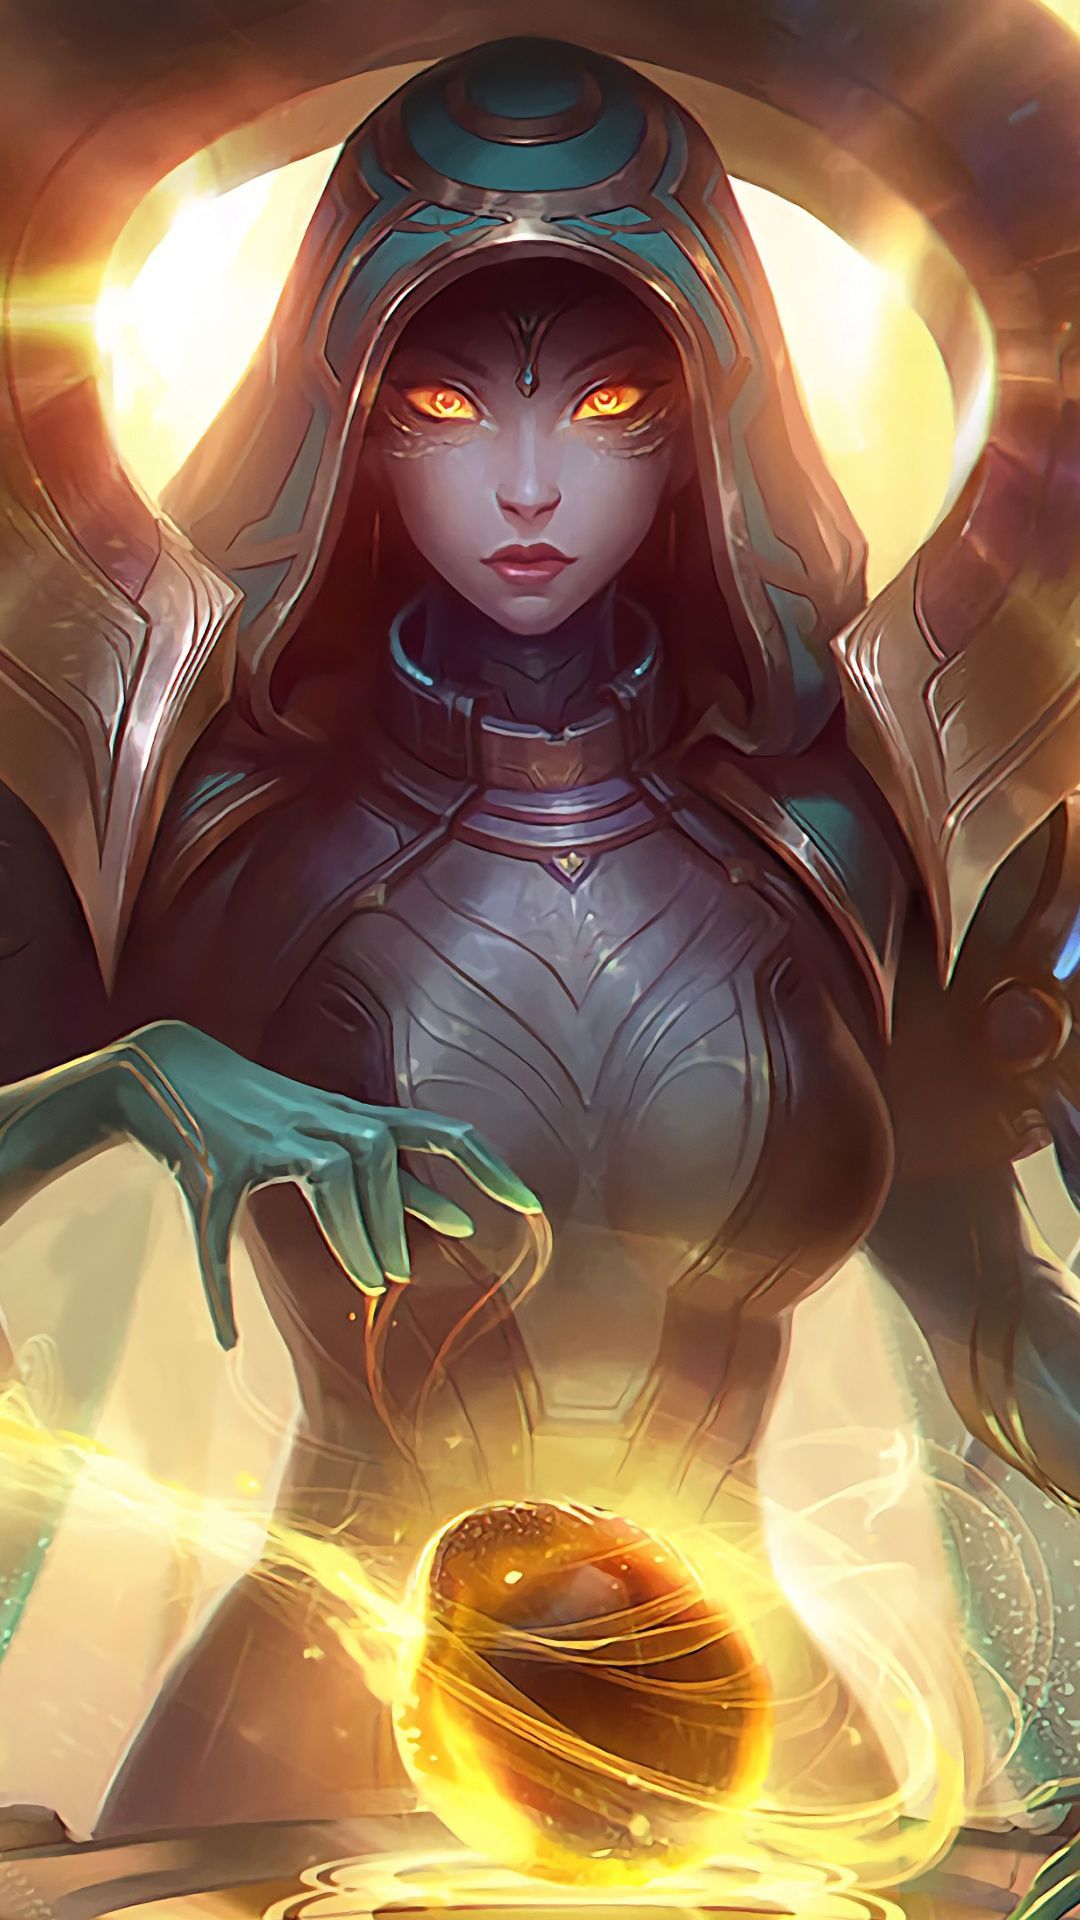 Sona, video game, League of Legends, 1080x1920 wallpaper. Lol league of legends, League of legends, League of legends characters